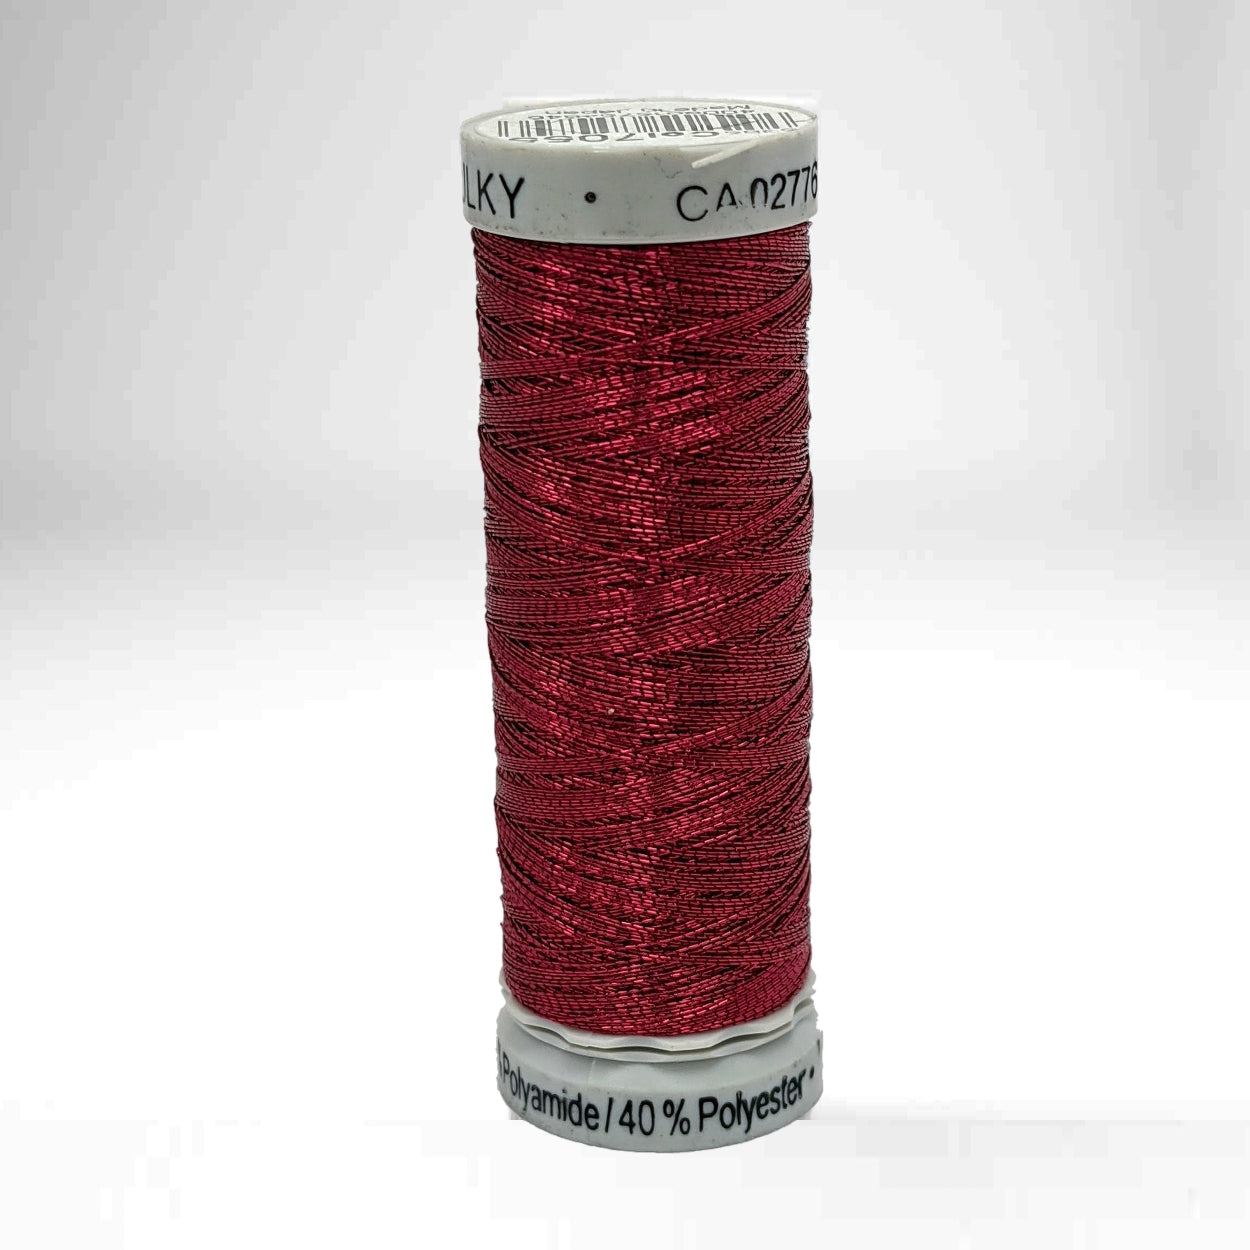 Sulky Metallic Embroidery Thread 7055 Dark Rose from Jaycotts Sewing Supplies